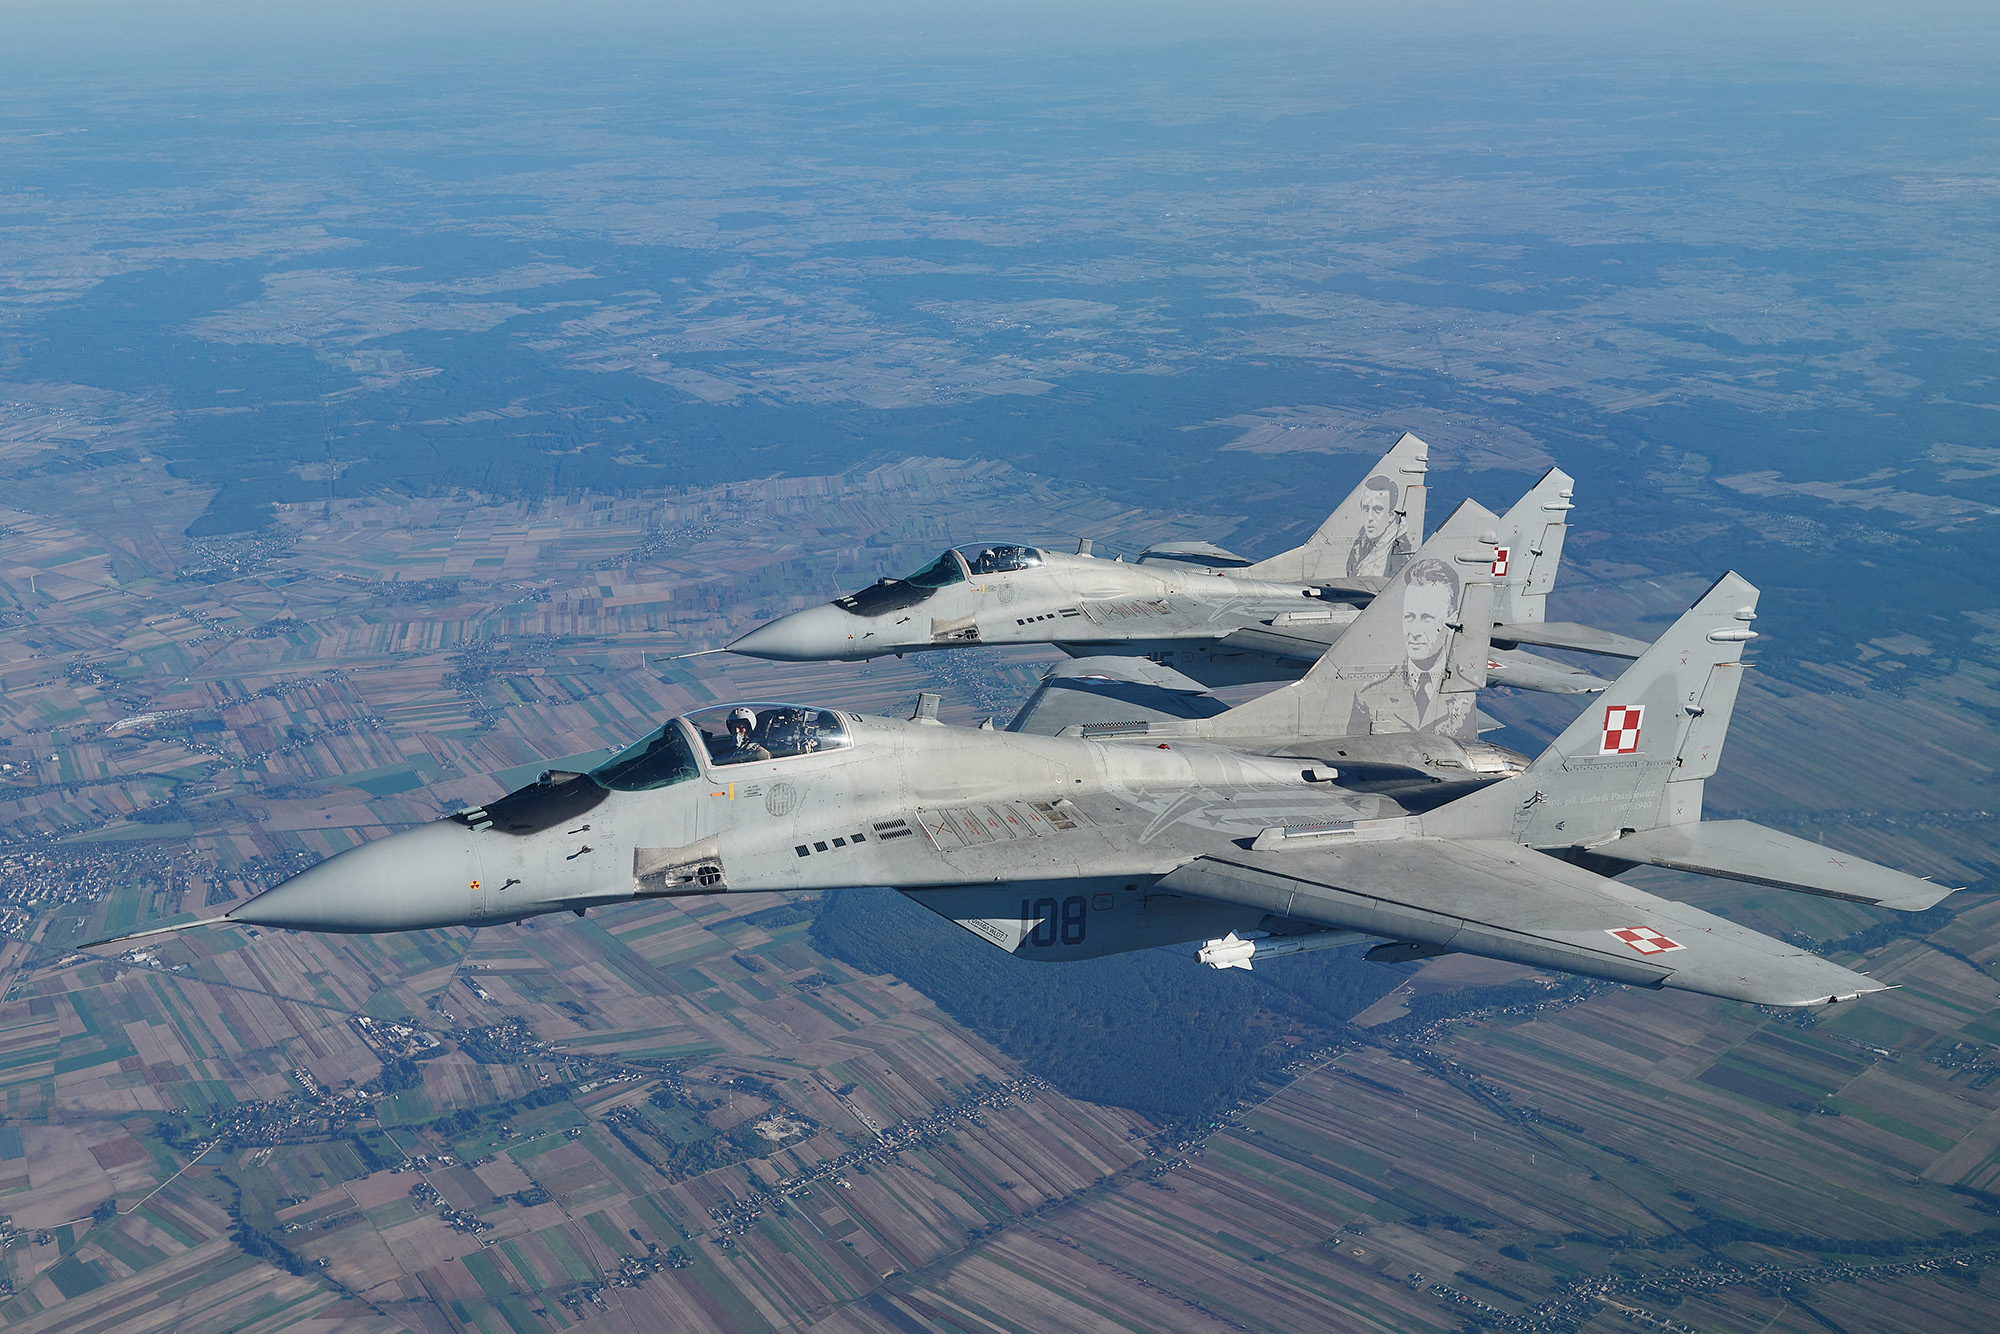 Two Polish MiG 29 fighter jets take part in the NATO Air Shielding exercise near the air base in Lask, central Poland on October 12.